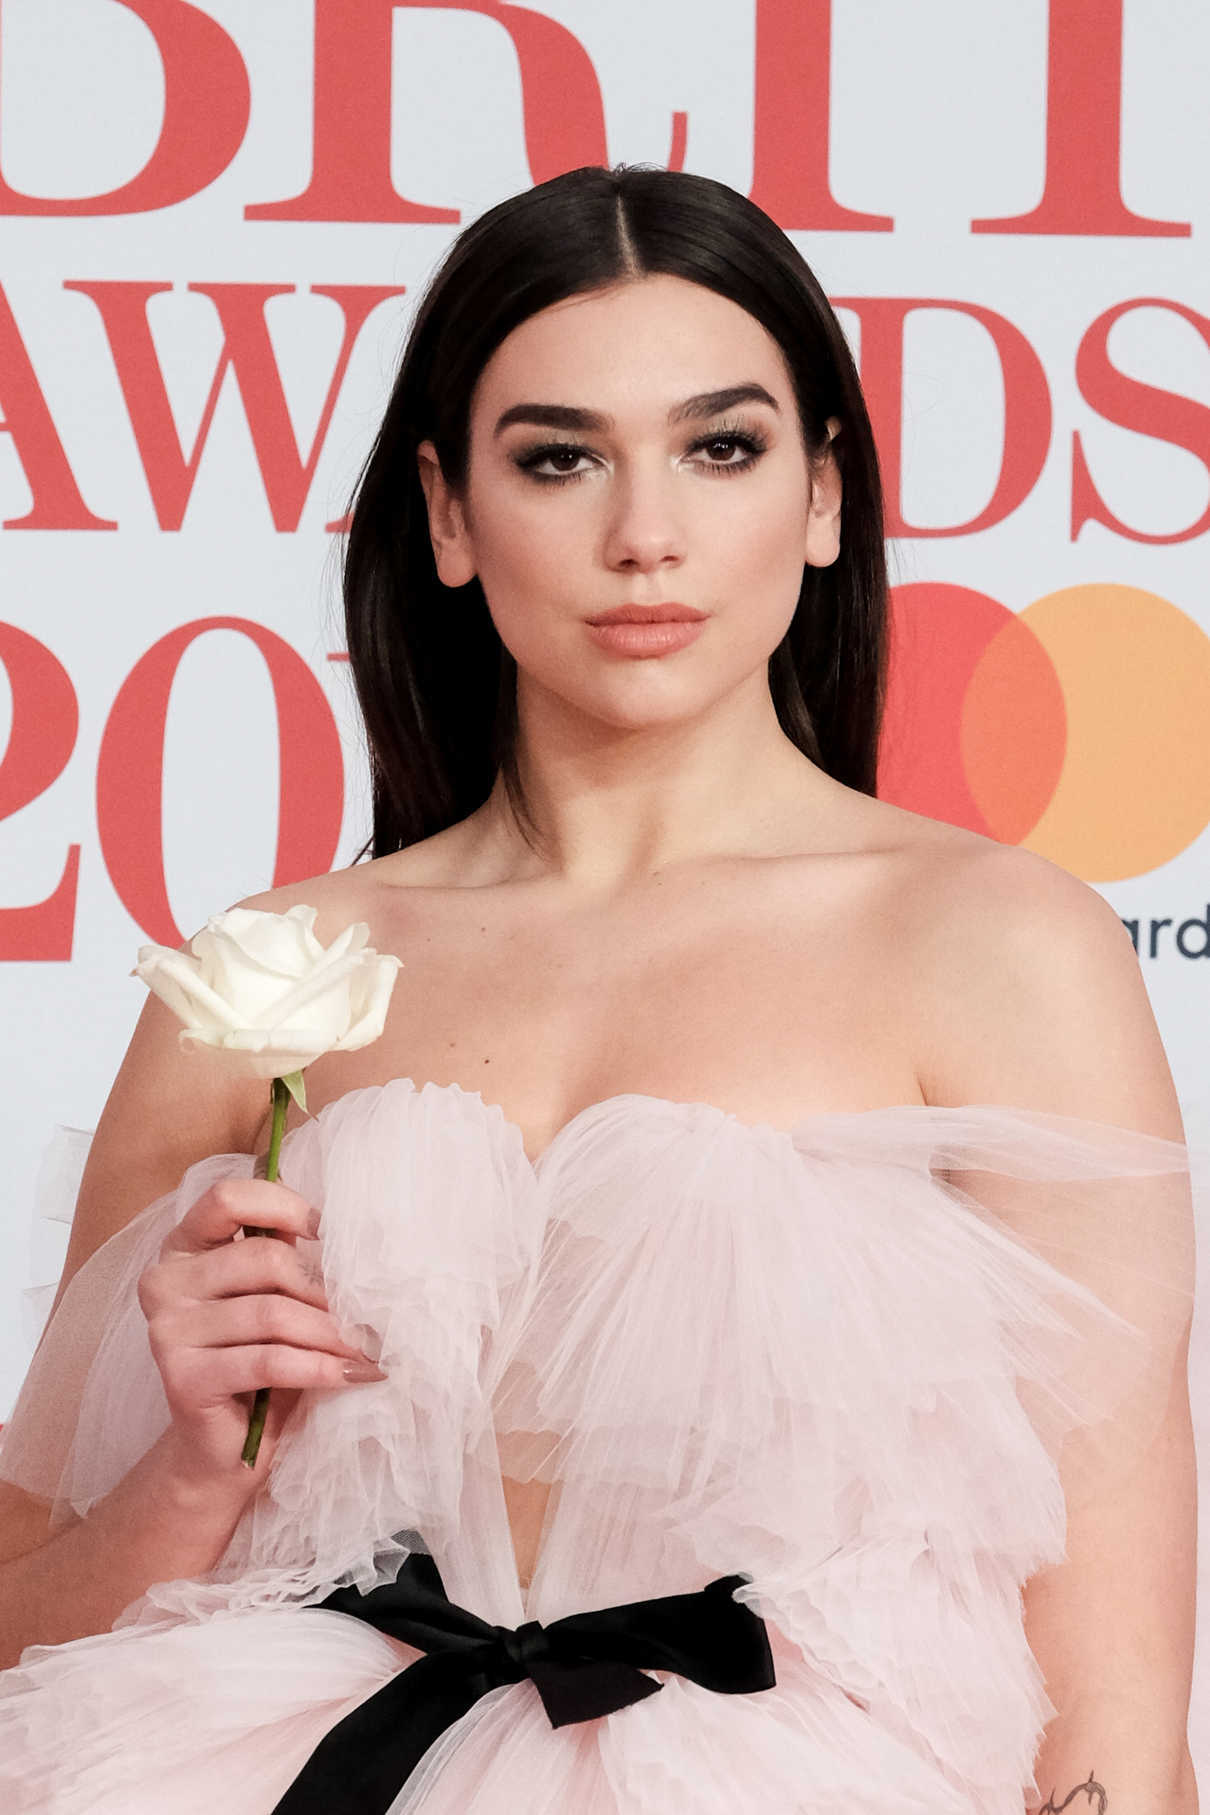 Dua Lipa Attends the 2018 Brit Awards at the O2 Arena in London 02/21/2018-5